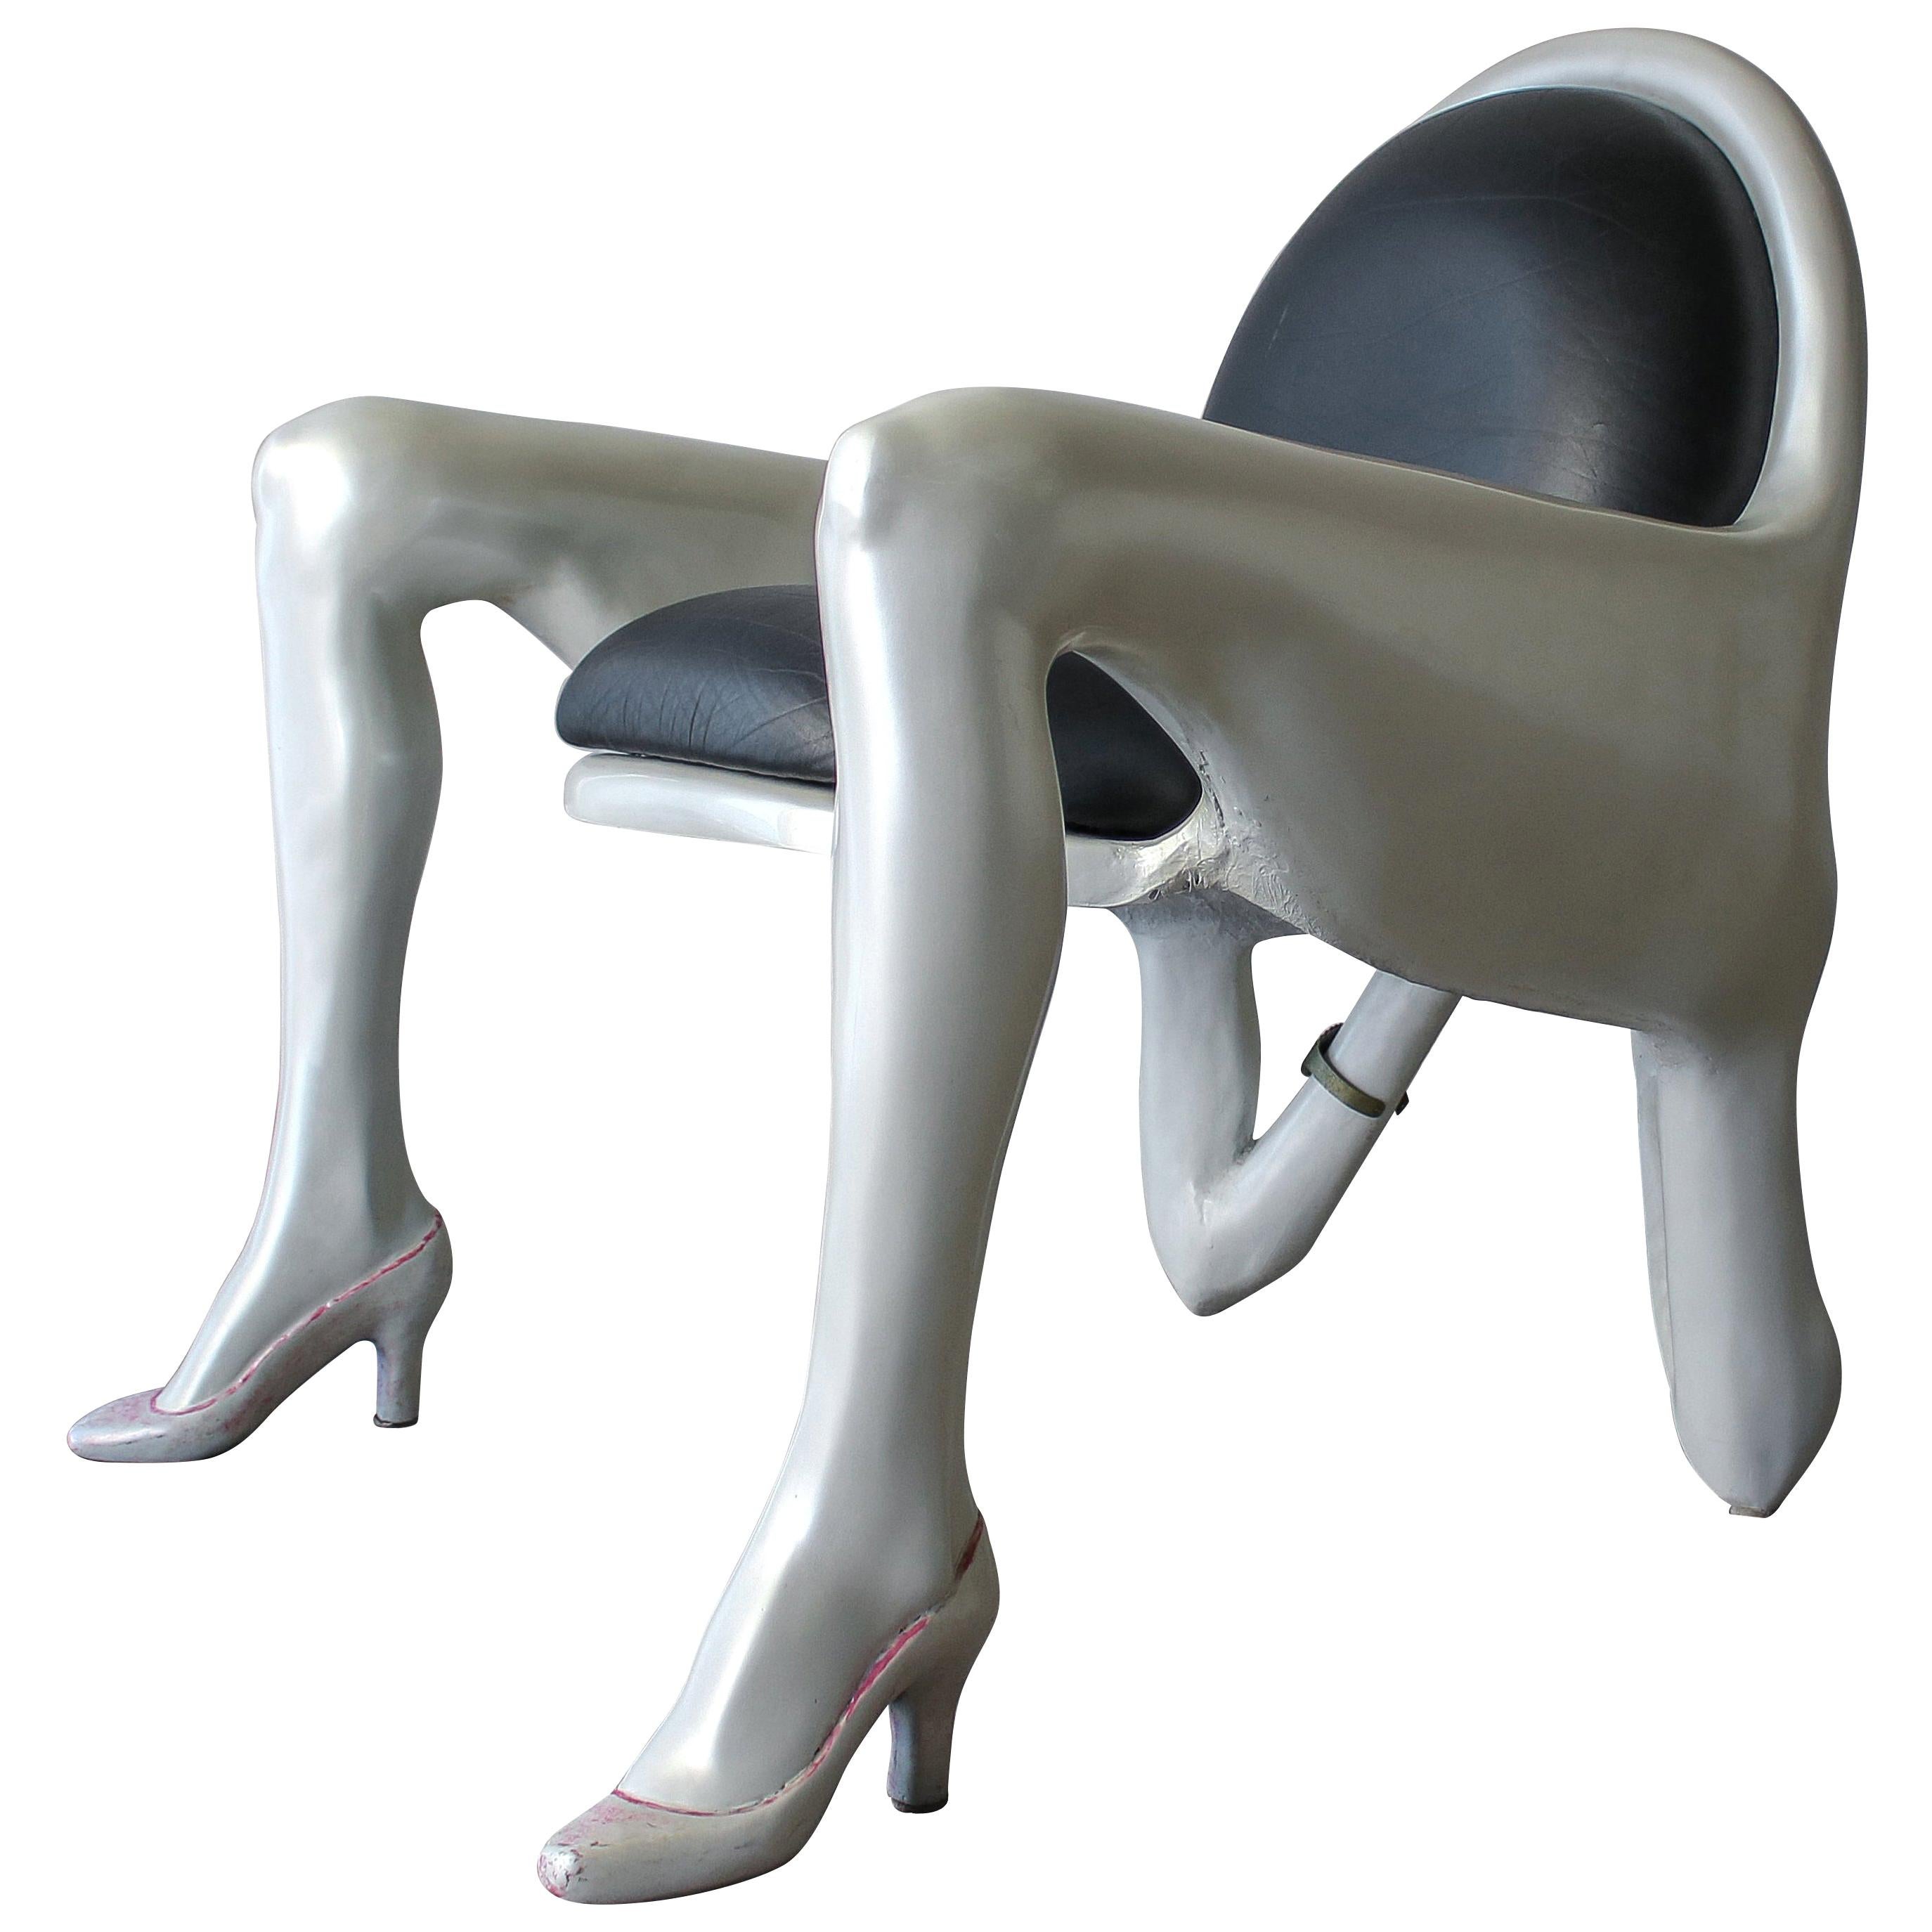 Anthony Redmile "Body" Chair